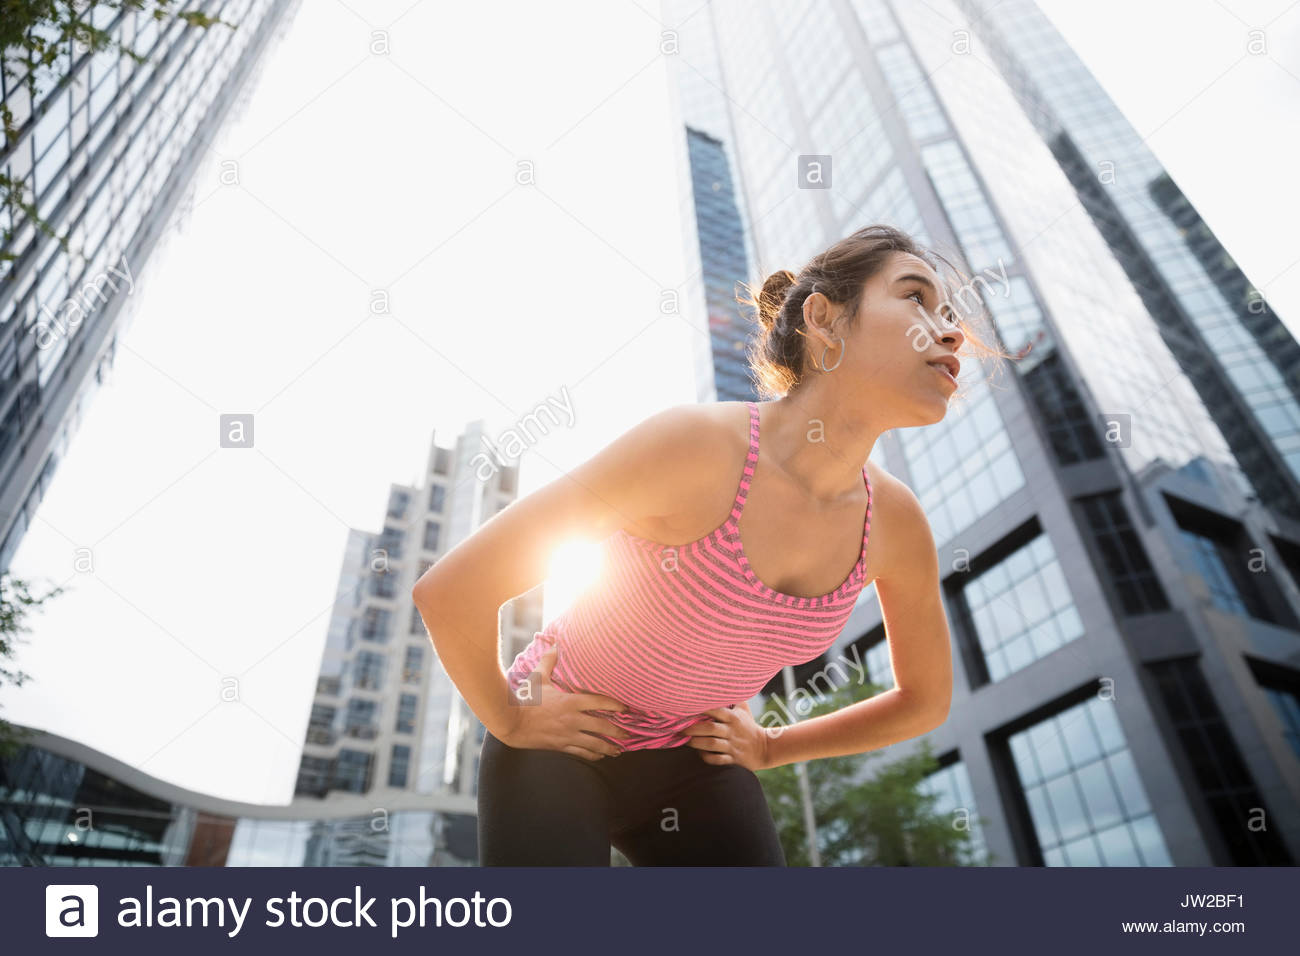 Tired young female runner resting, bending below urban highrise building Stock Photo